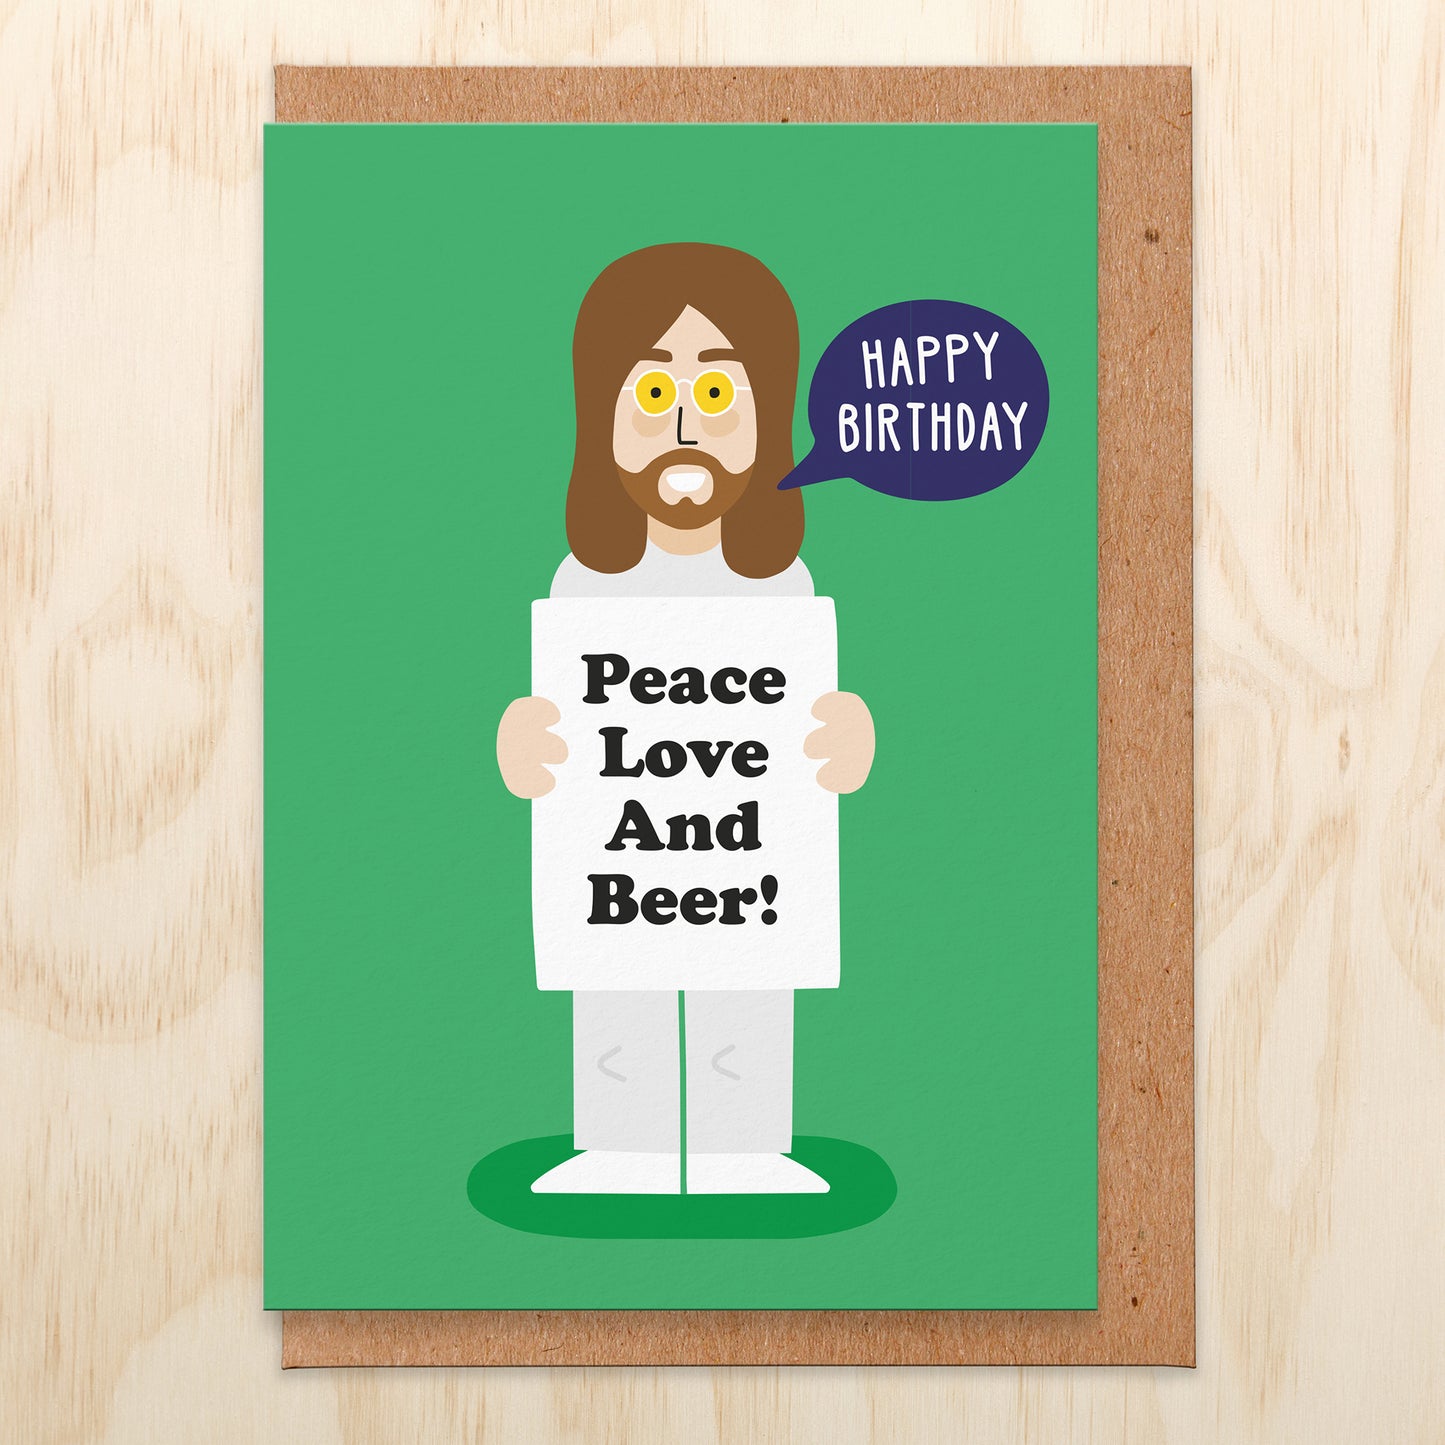 Peace, Love and Beer - Birthday Card